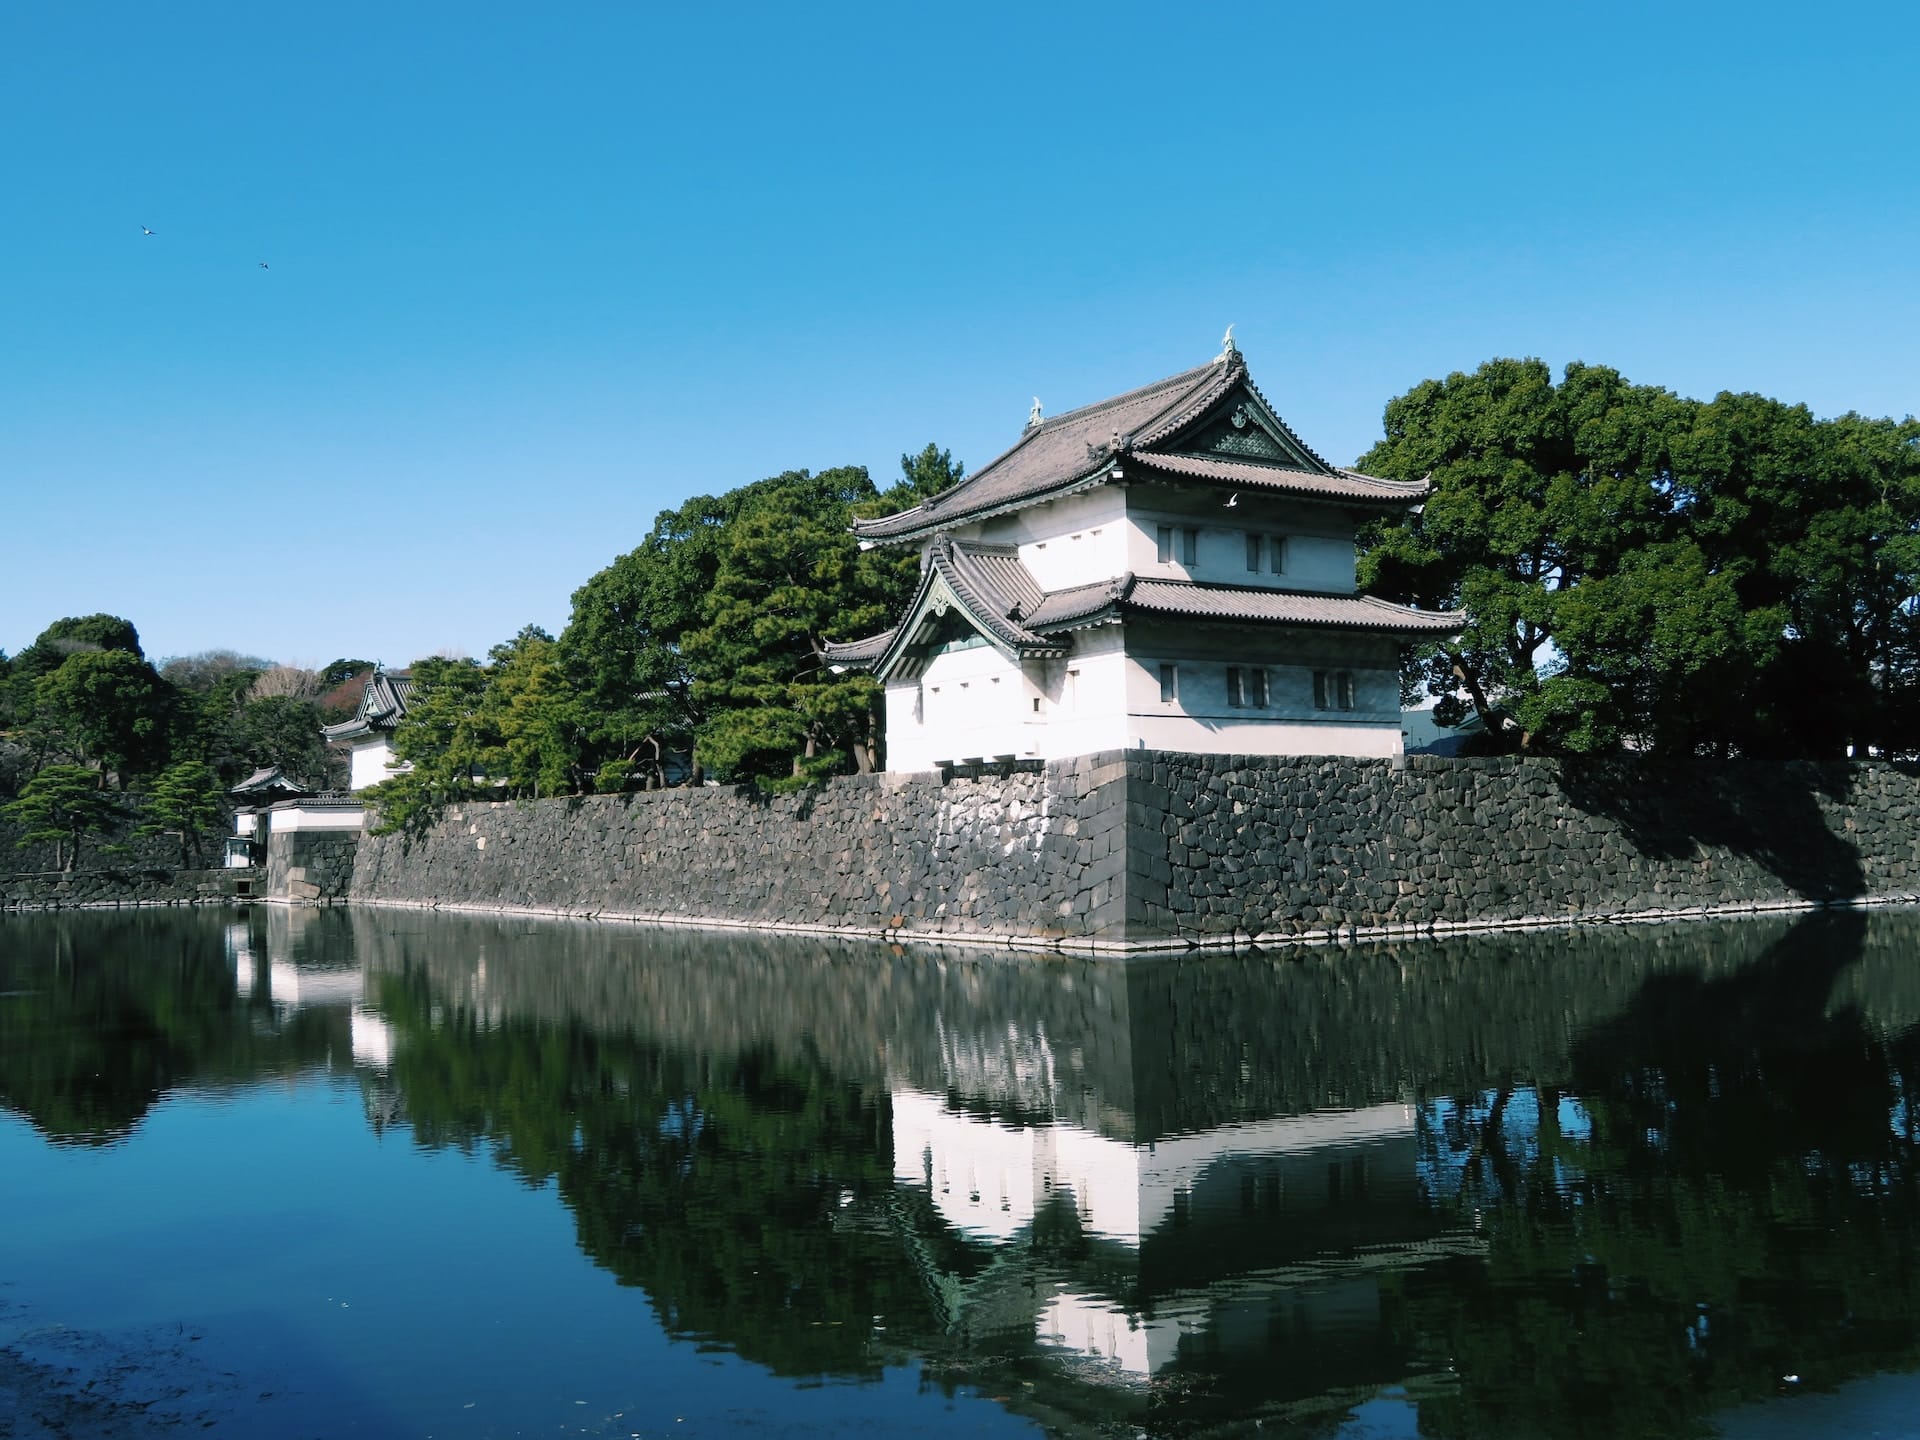 Located in central Tokyo, Chiyoda City is an essential destination for visitors interested in Japanese history, culture, and politics